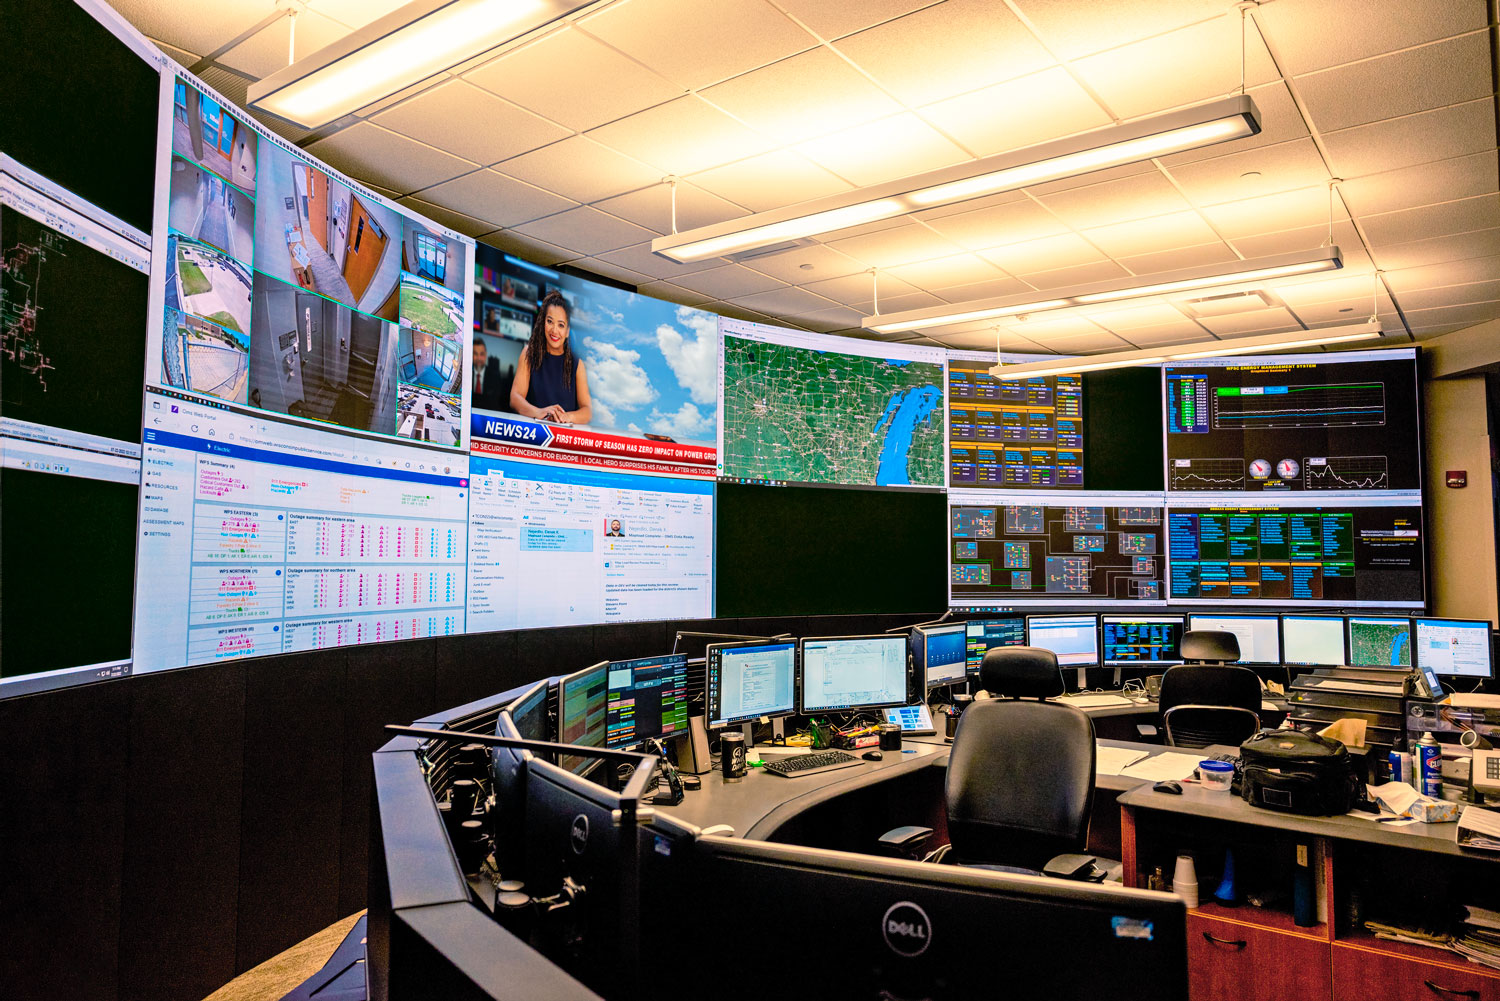 Thumbnail - WEC Energy Group administrators and control room personnel are pleased with the functionality, flexibility, and reliability of the new videowall system in the Operations Center.